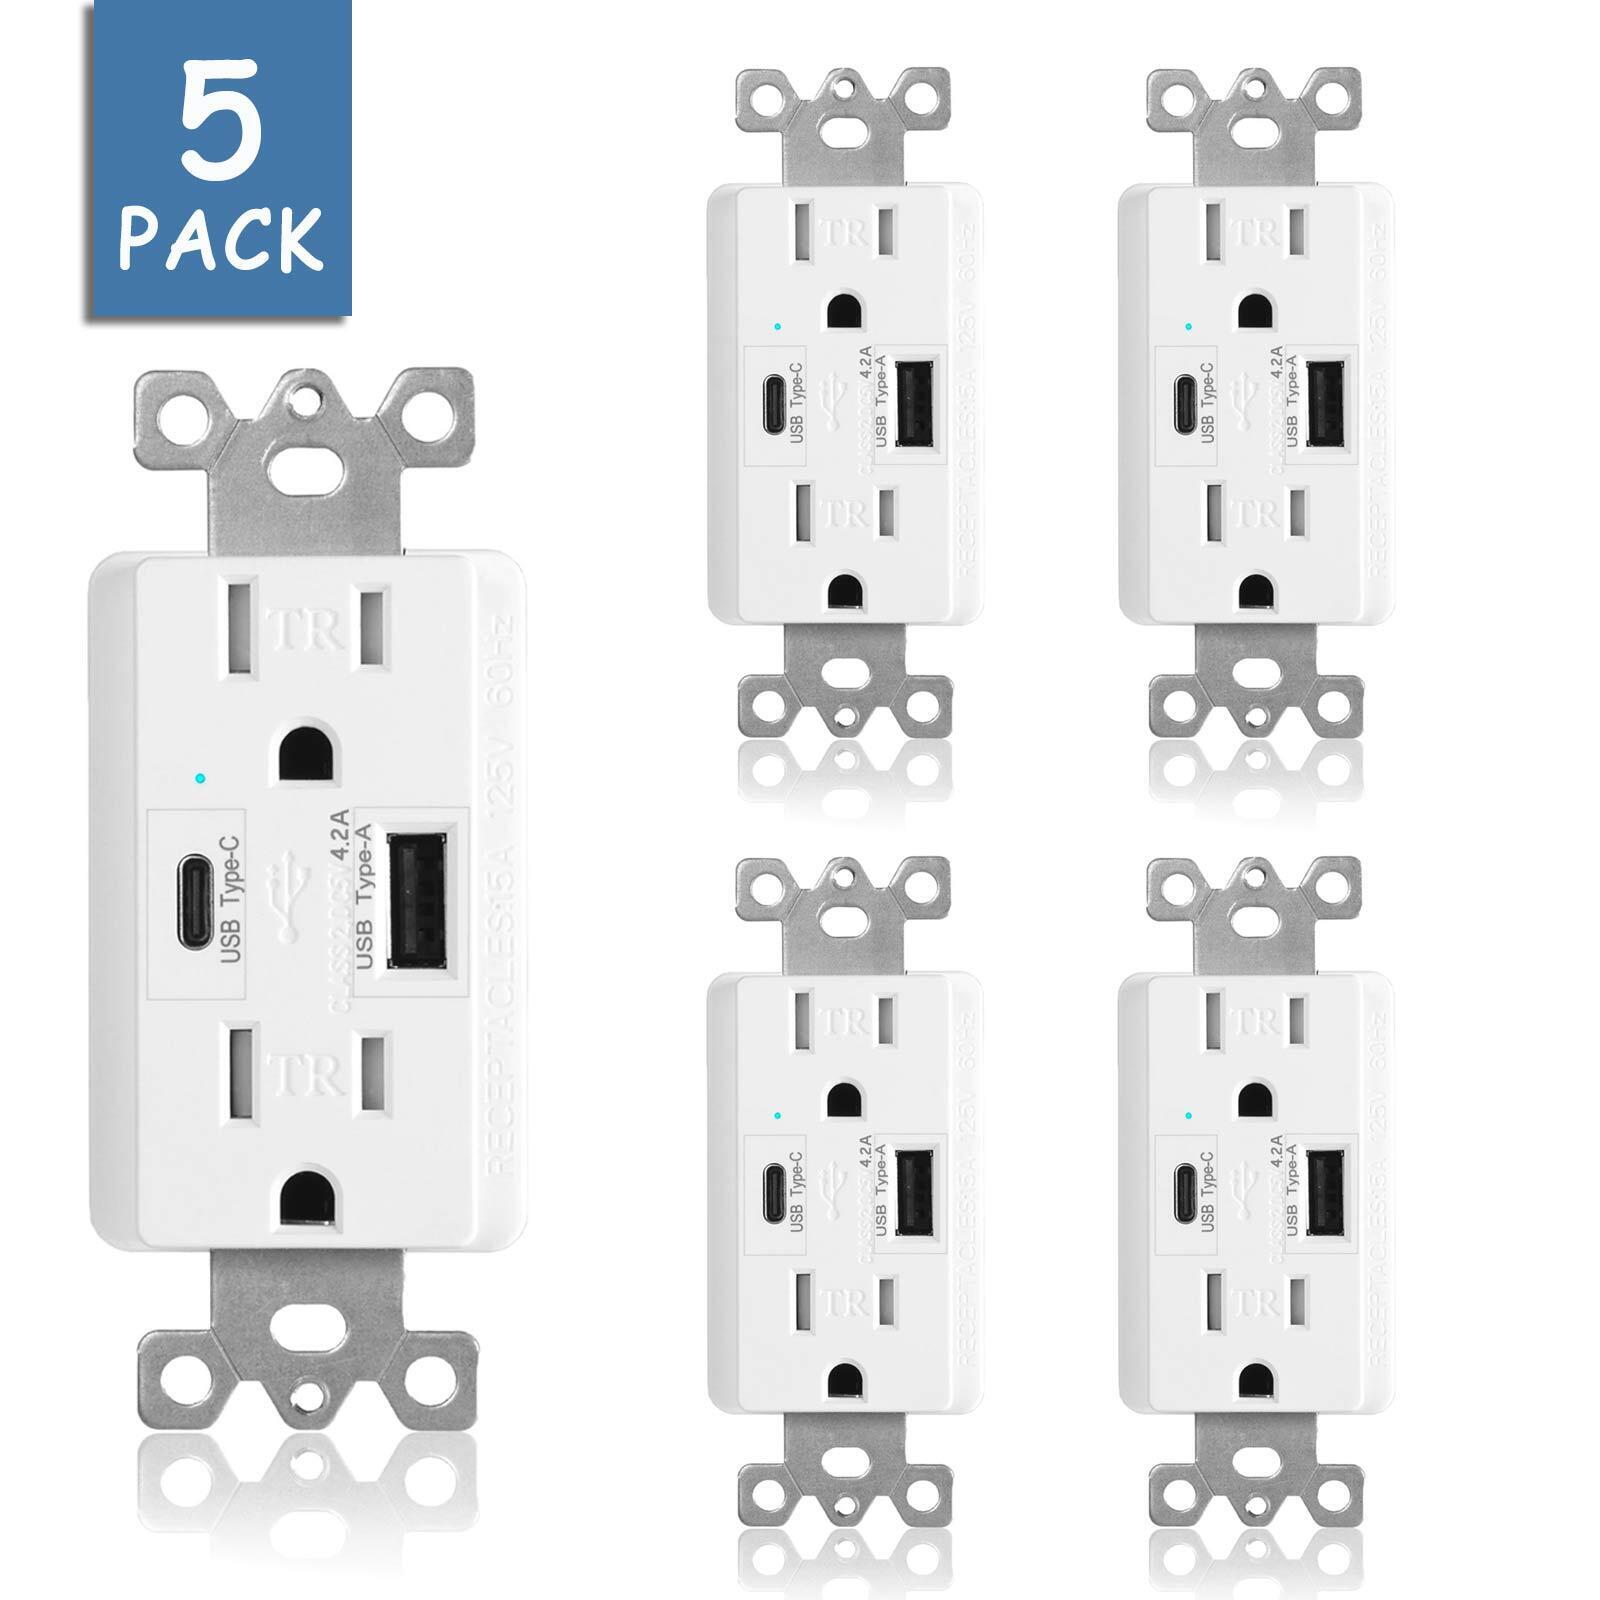 4.2A High Speed USB TypeC/A Receptacle 15A Tamper Resistant Outlet Charger White